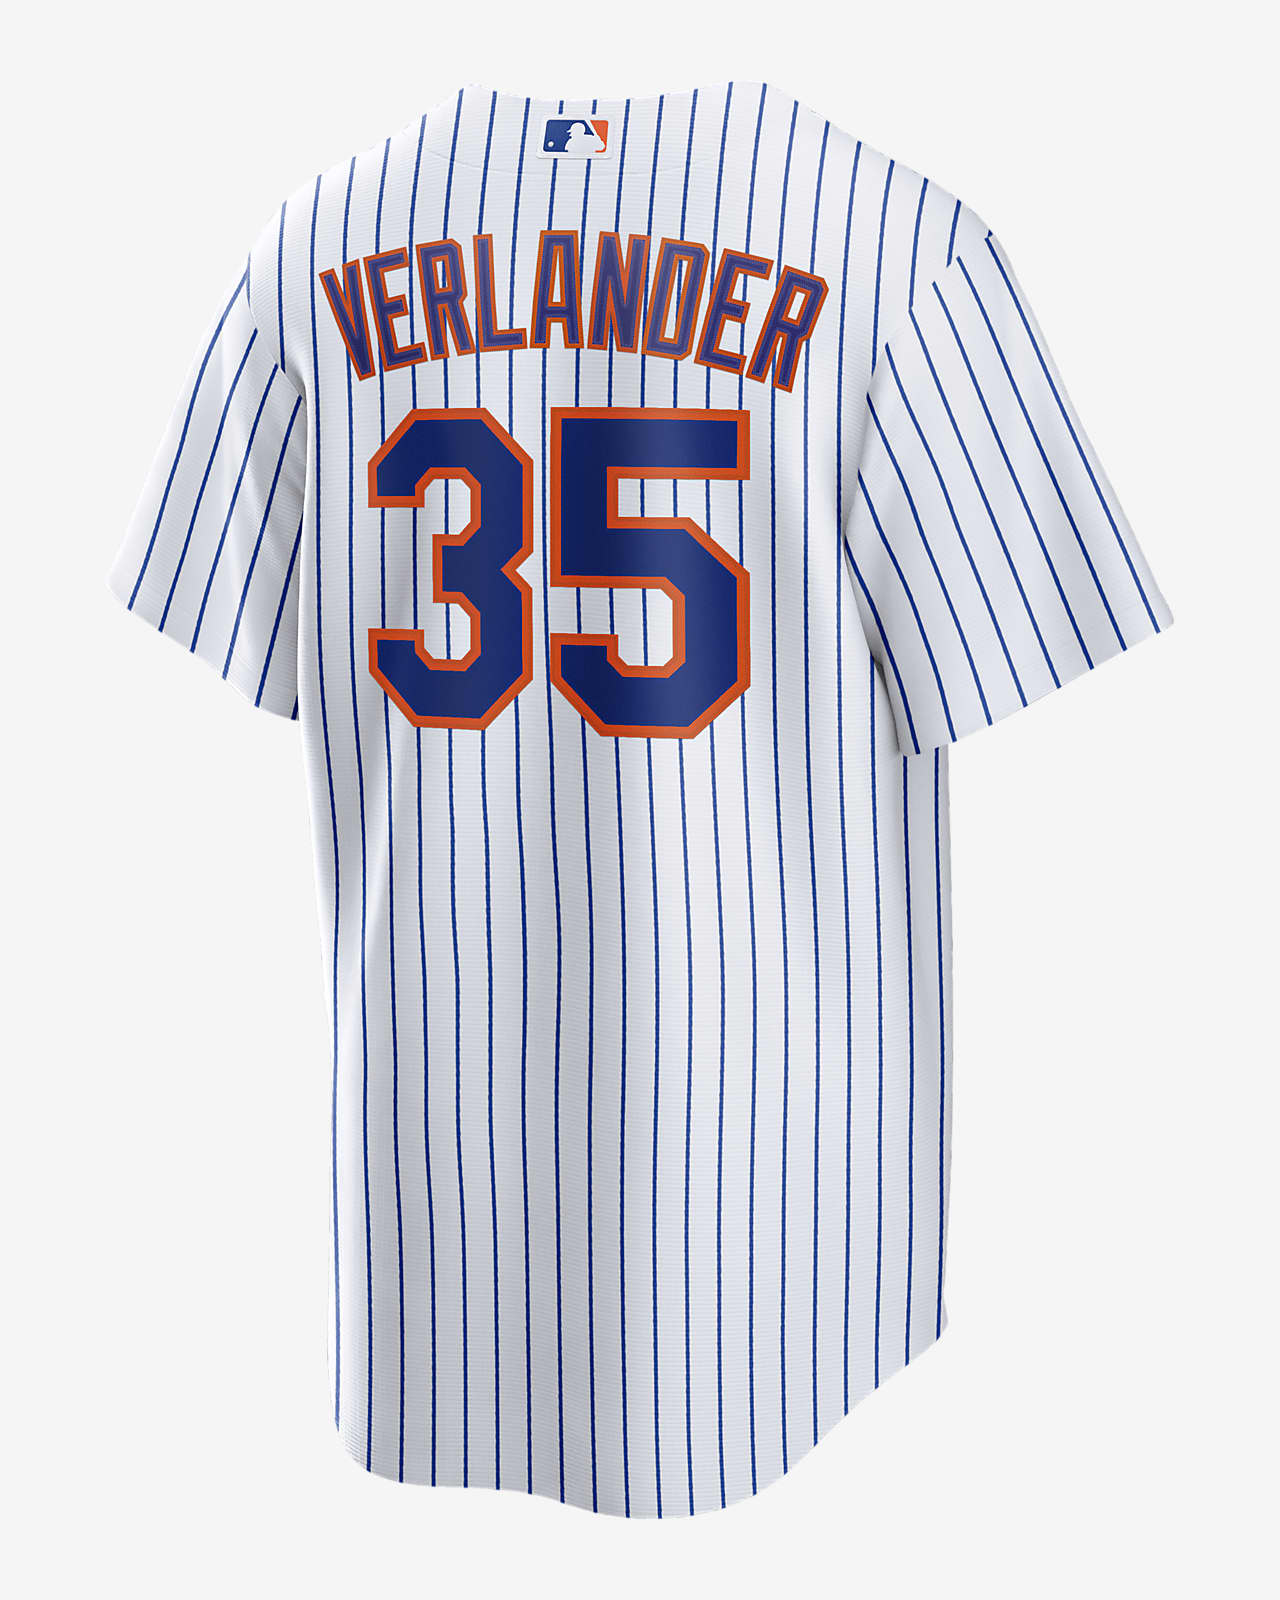 Michael Conforto #30 - Game Used White Pinstripe Jersey - Seaver Patch -  1-4, HR (13), RBI - Mets vs. Marlins - 9/29/21